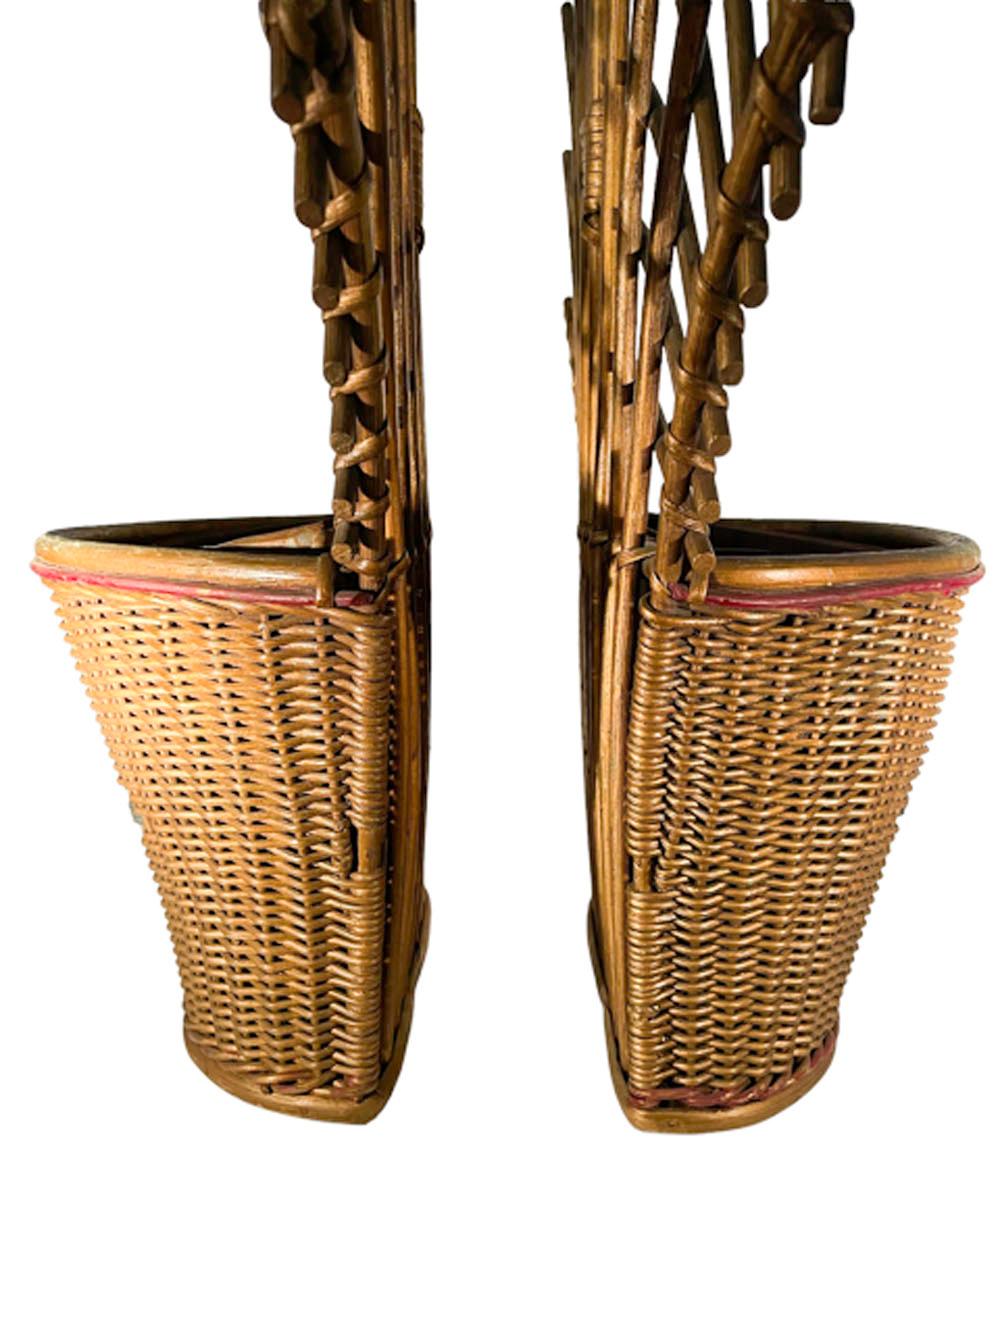 20th Century Pair of Art Deco Wicker Wall Planters with Trellis Backs in Original Condition For Sale